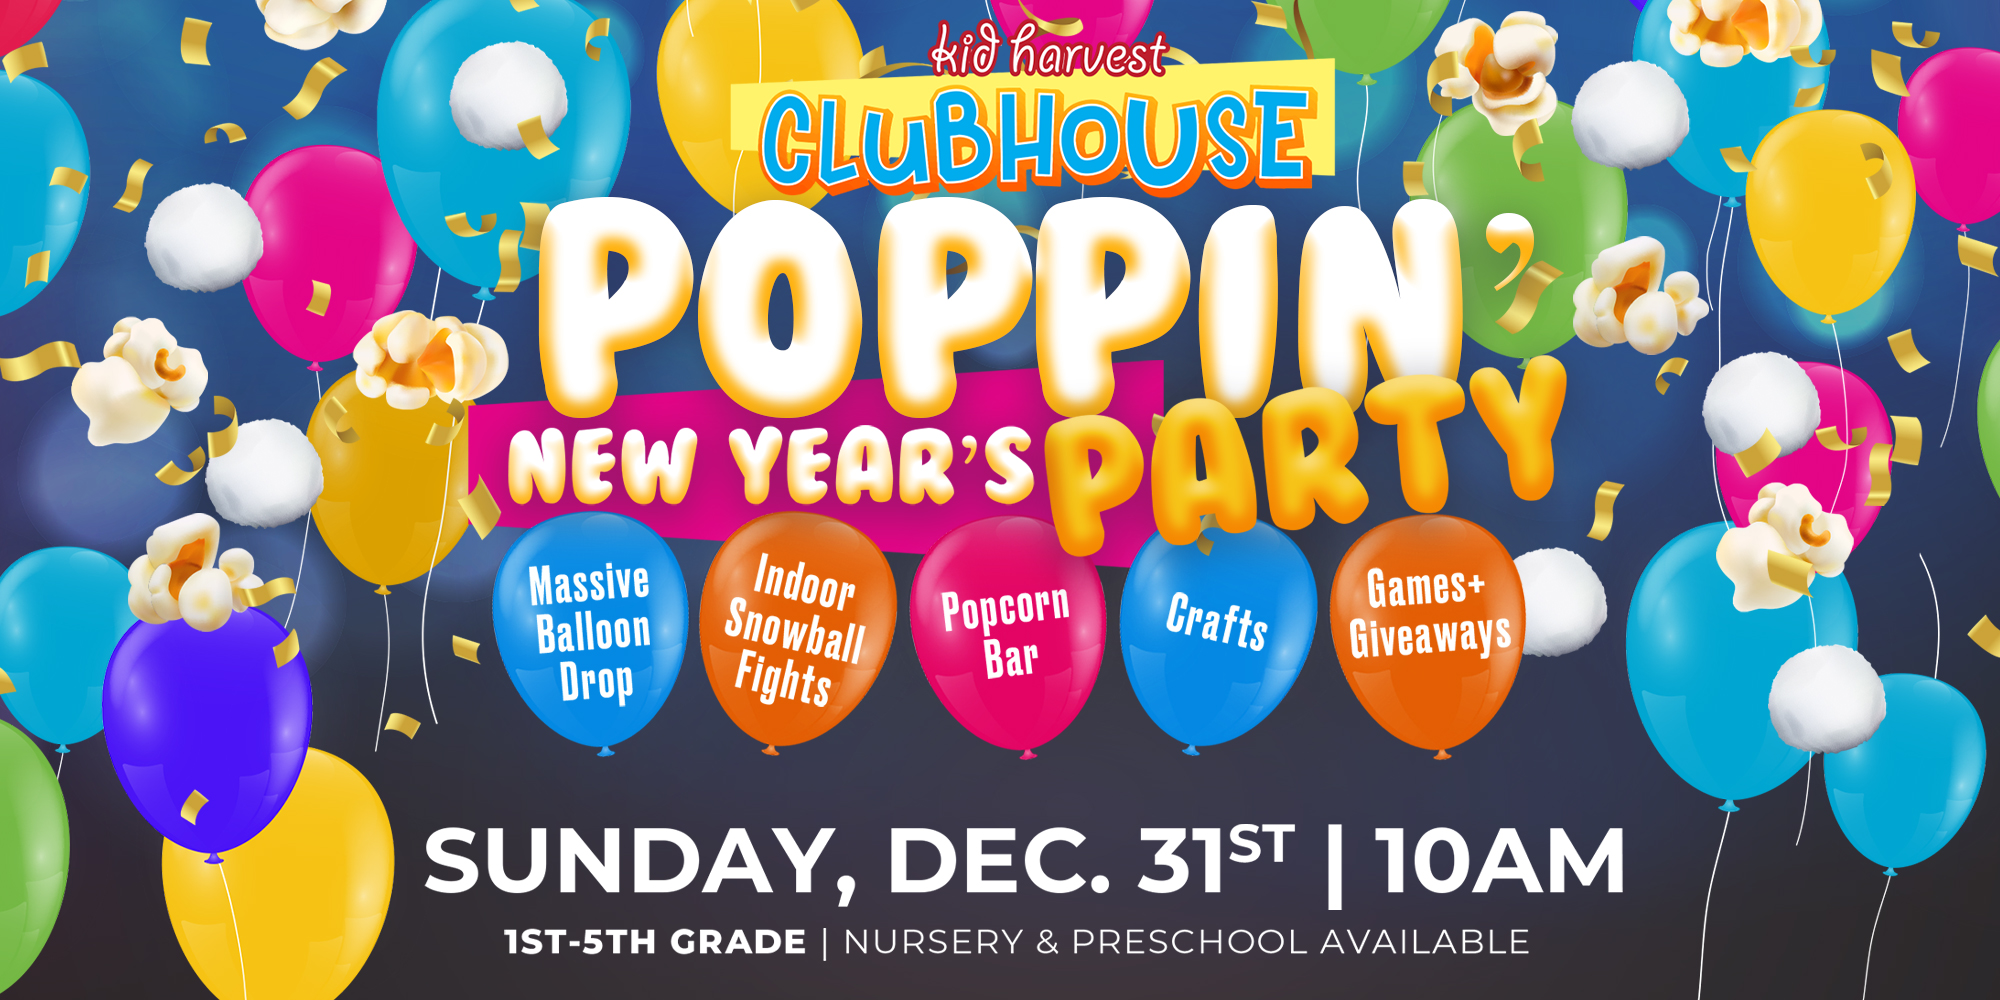 Sunday, Dec. 31st 10am Kid Harvest Clubhouse Poppin New Year's Eve Party - Massive Balloon Drop - Indoor Snowball Fights - Popcorn Bar - Crafts - Games And Giveaways